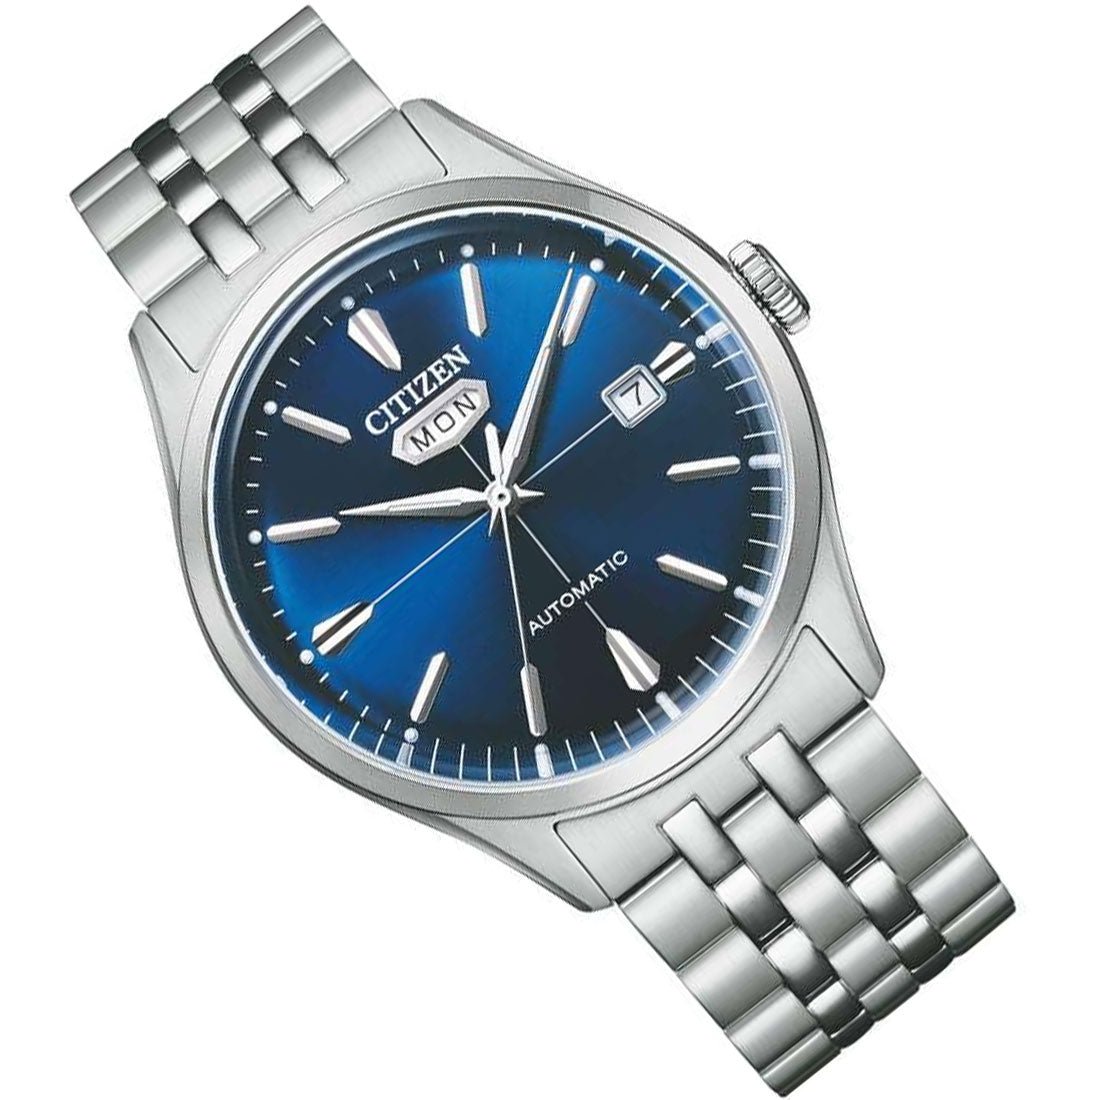 Citizen C7 Mechanical NH8390-71L NH8390-71 Male Stainless Steel Watch Blue Dial Analog -Citizen